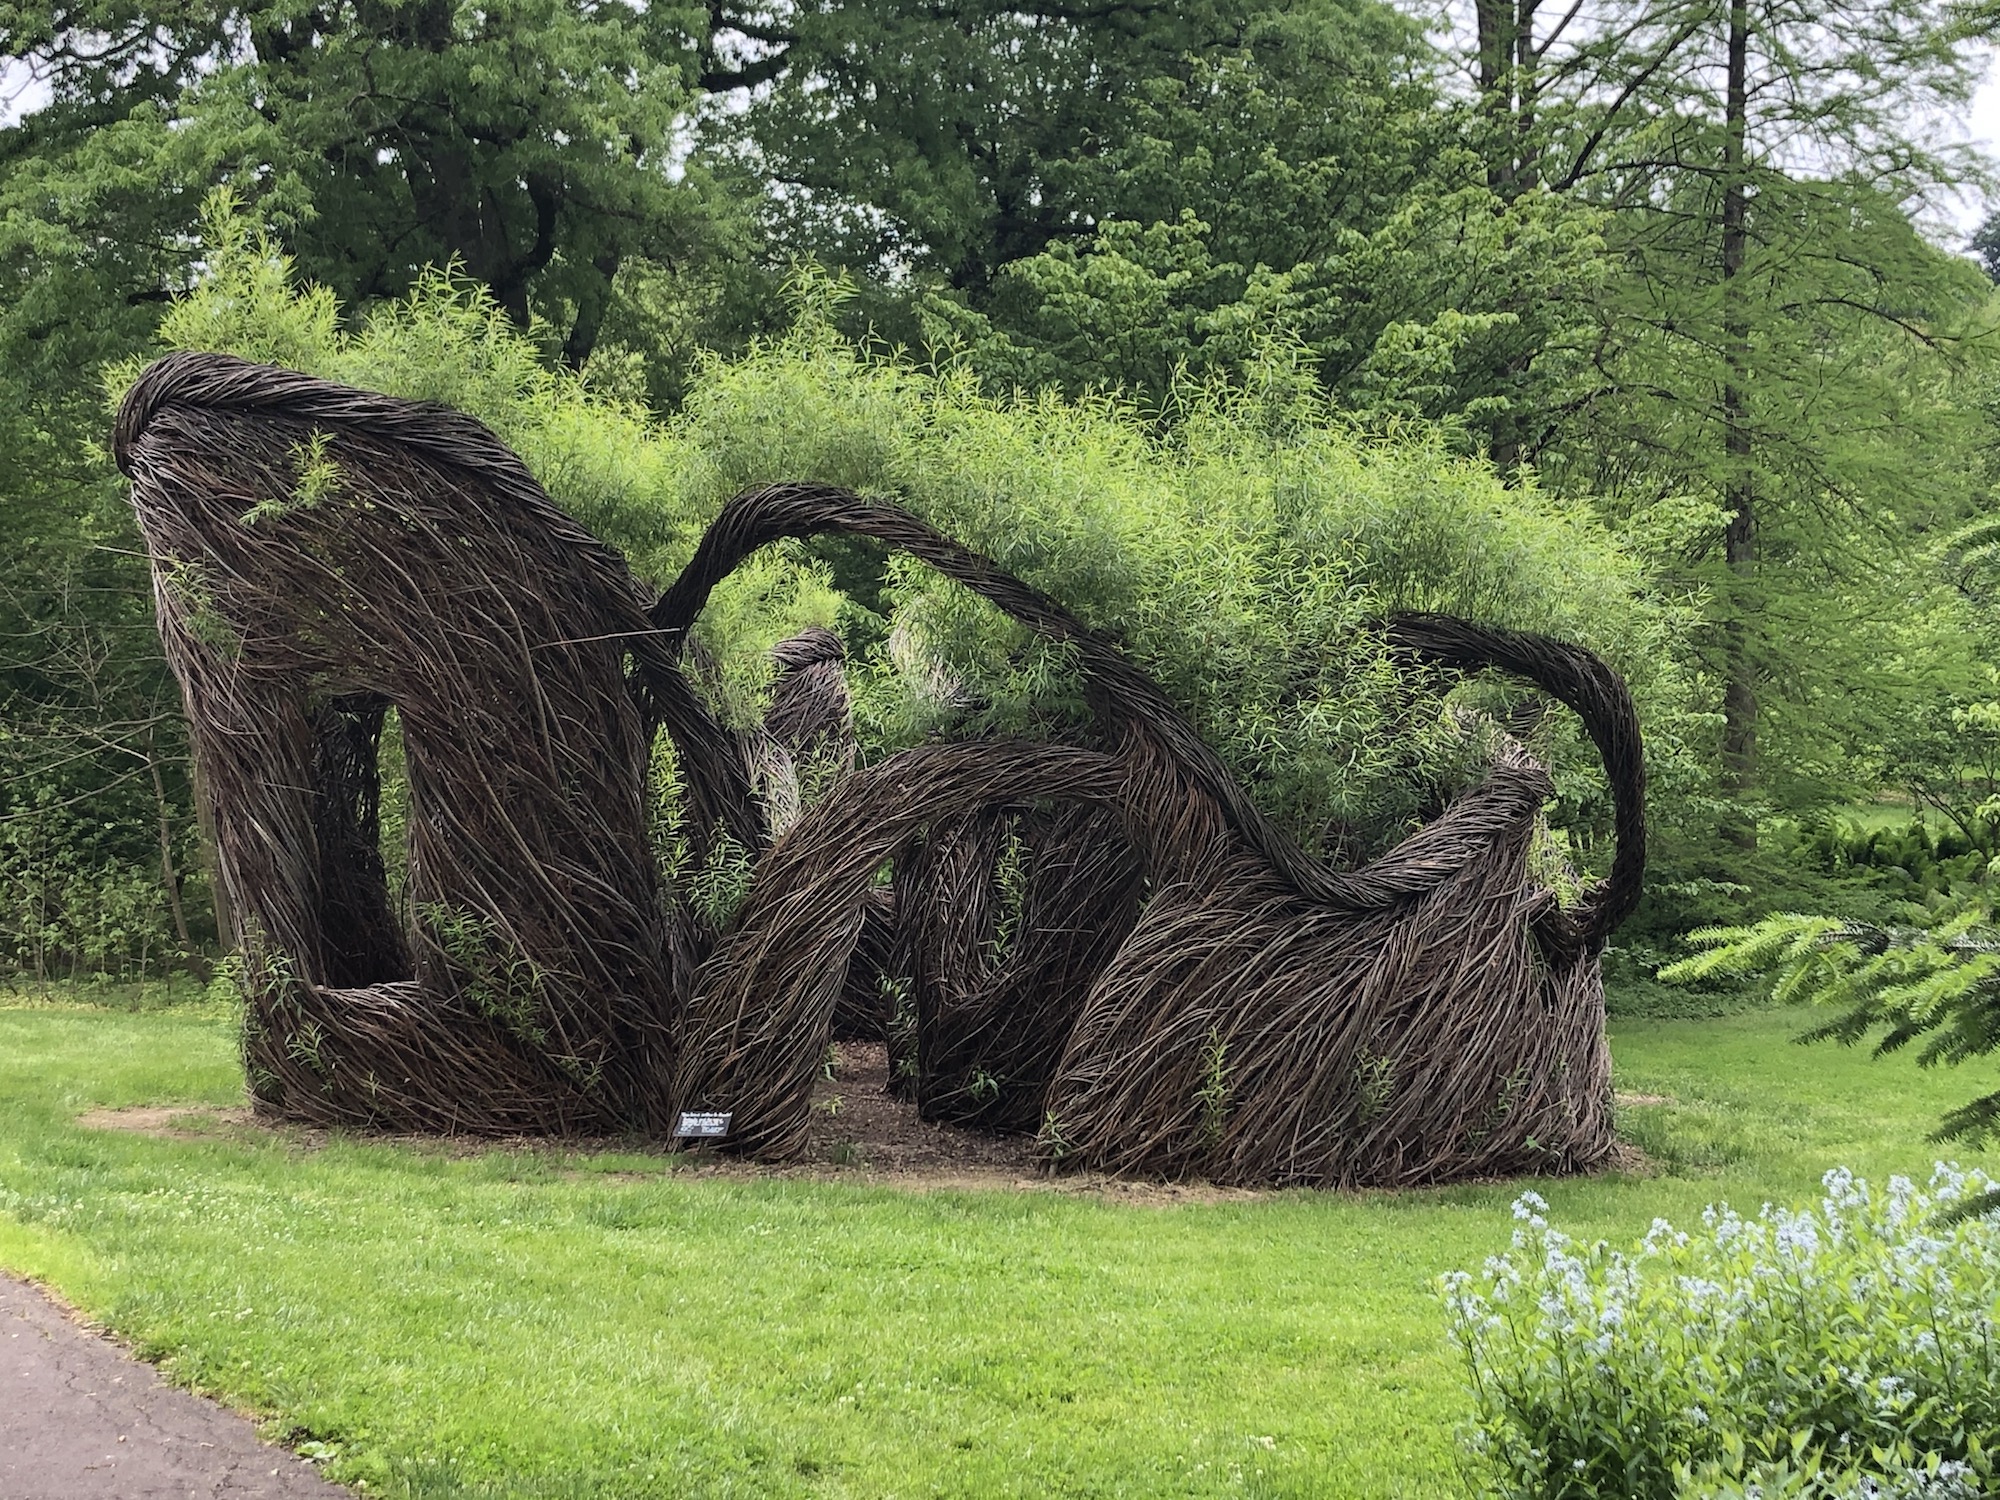 Large and curvaceous sculpture made of willow branches in a field